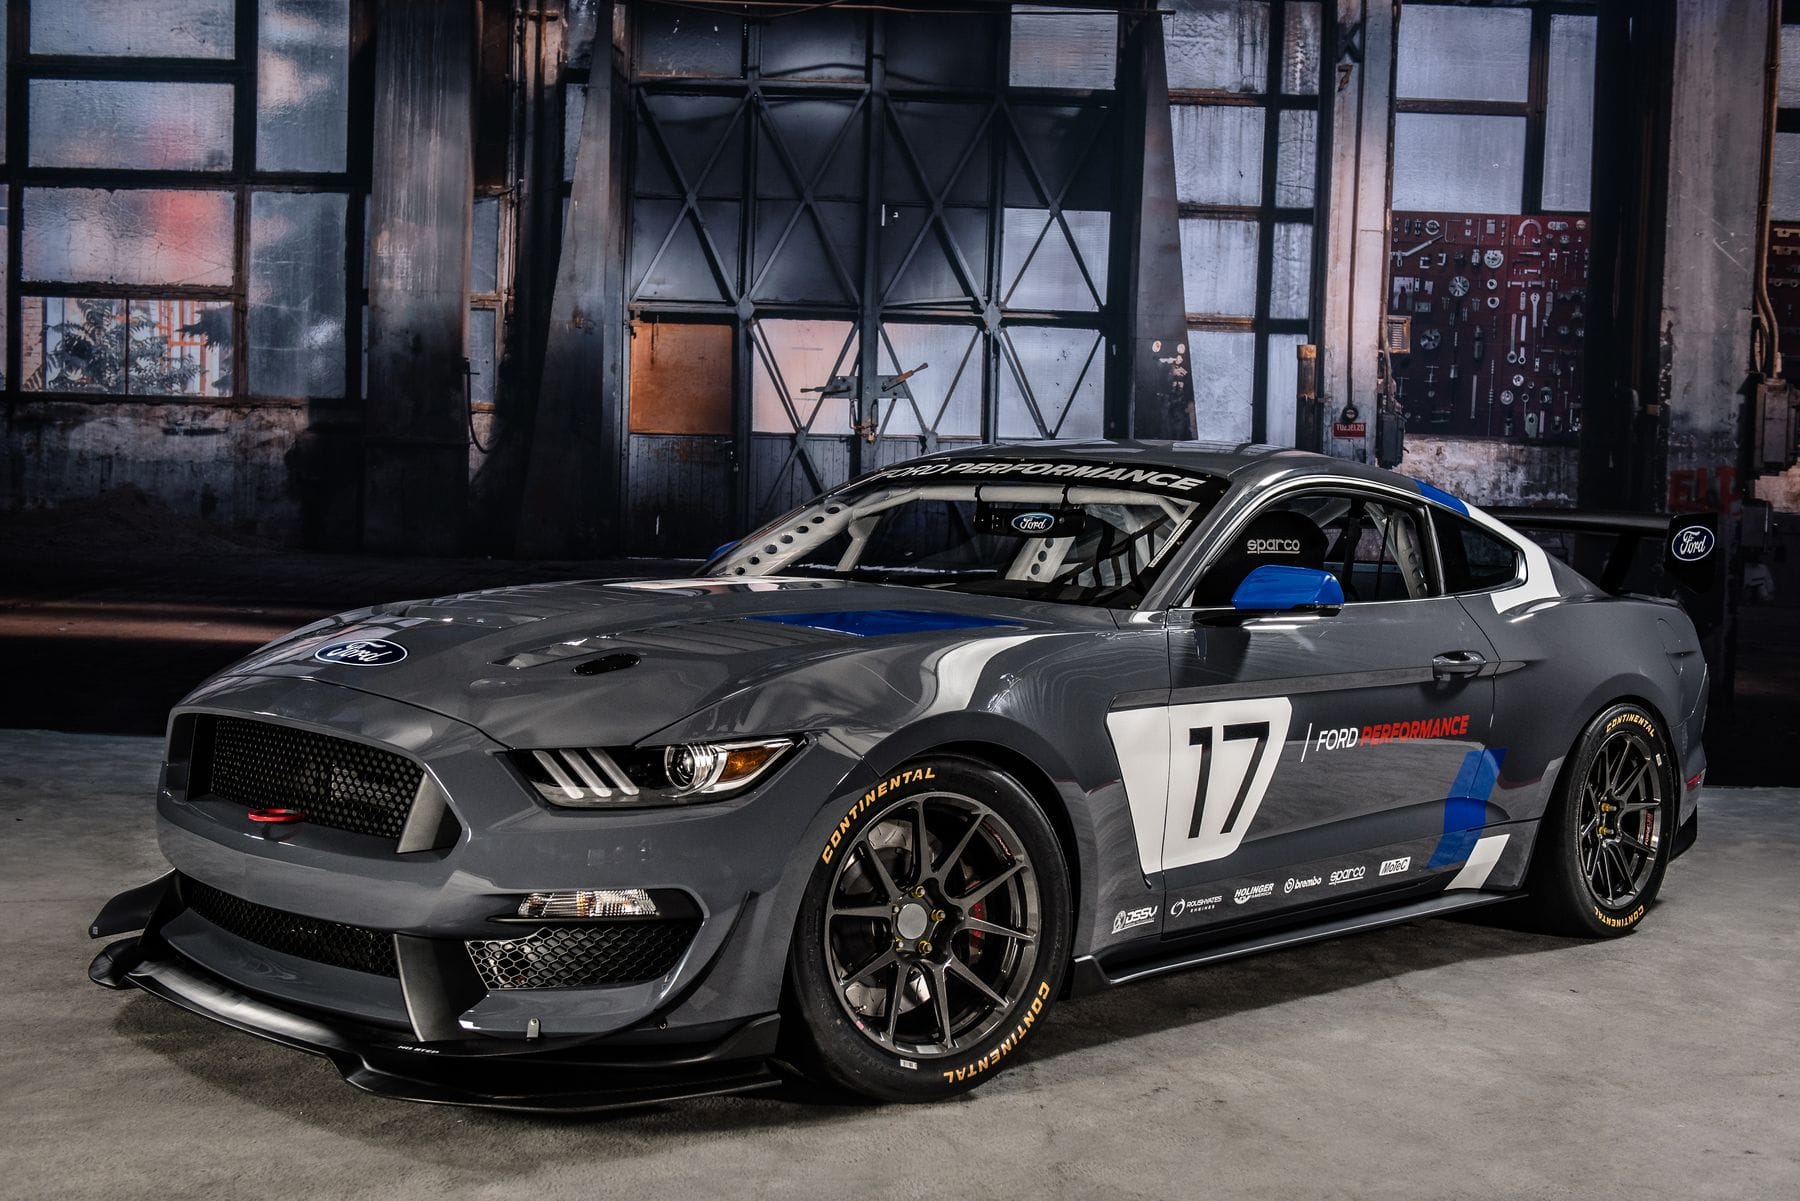 Ford Mustang GT4: Offizielle Rennversion des Pony Cars.